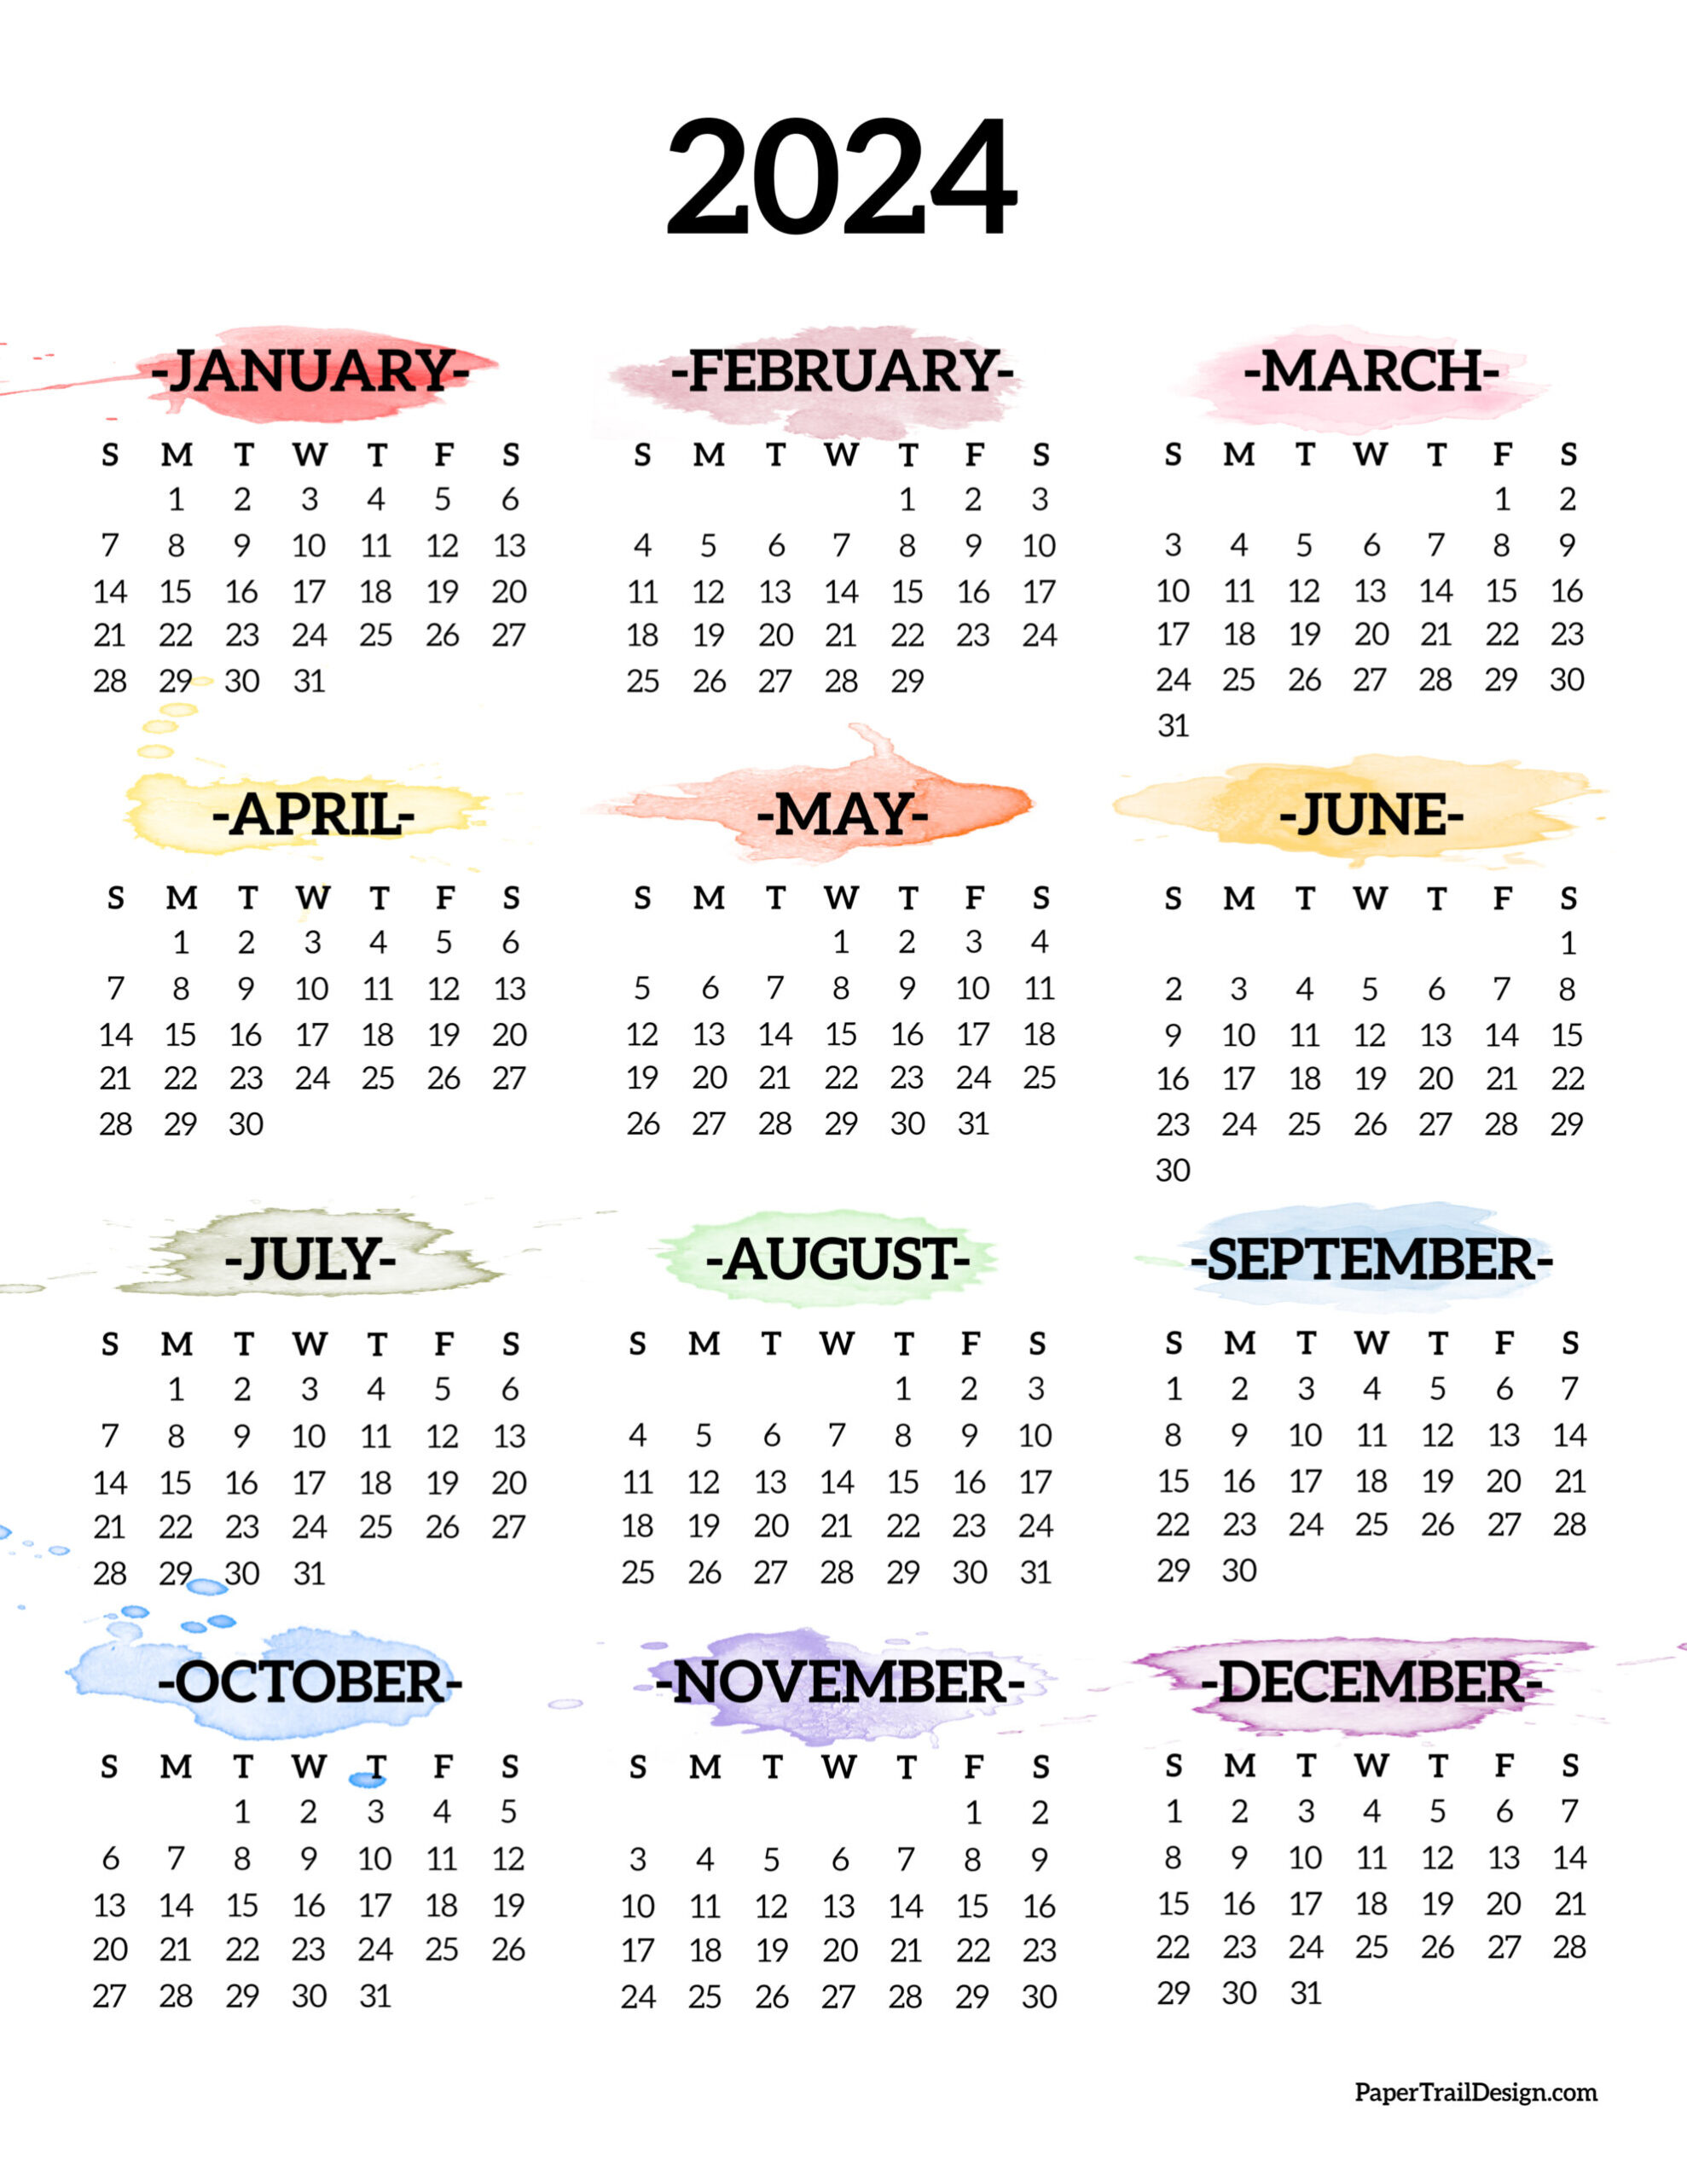 Calendar 2024 Printable One Page - Paper Trail Design for Printable One Page 2024 Calendar